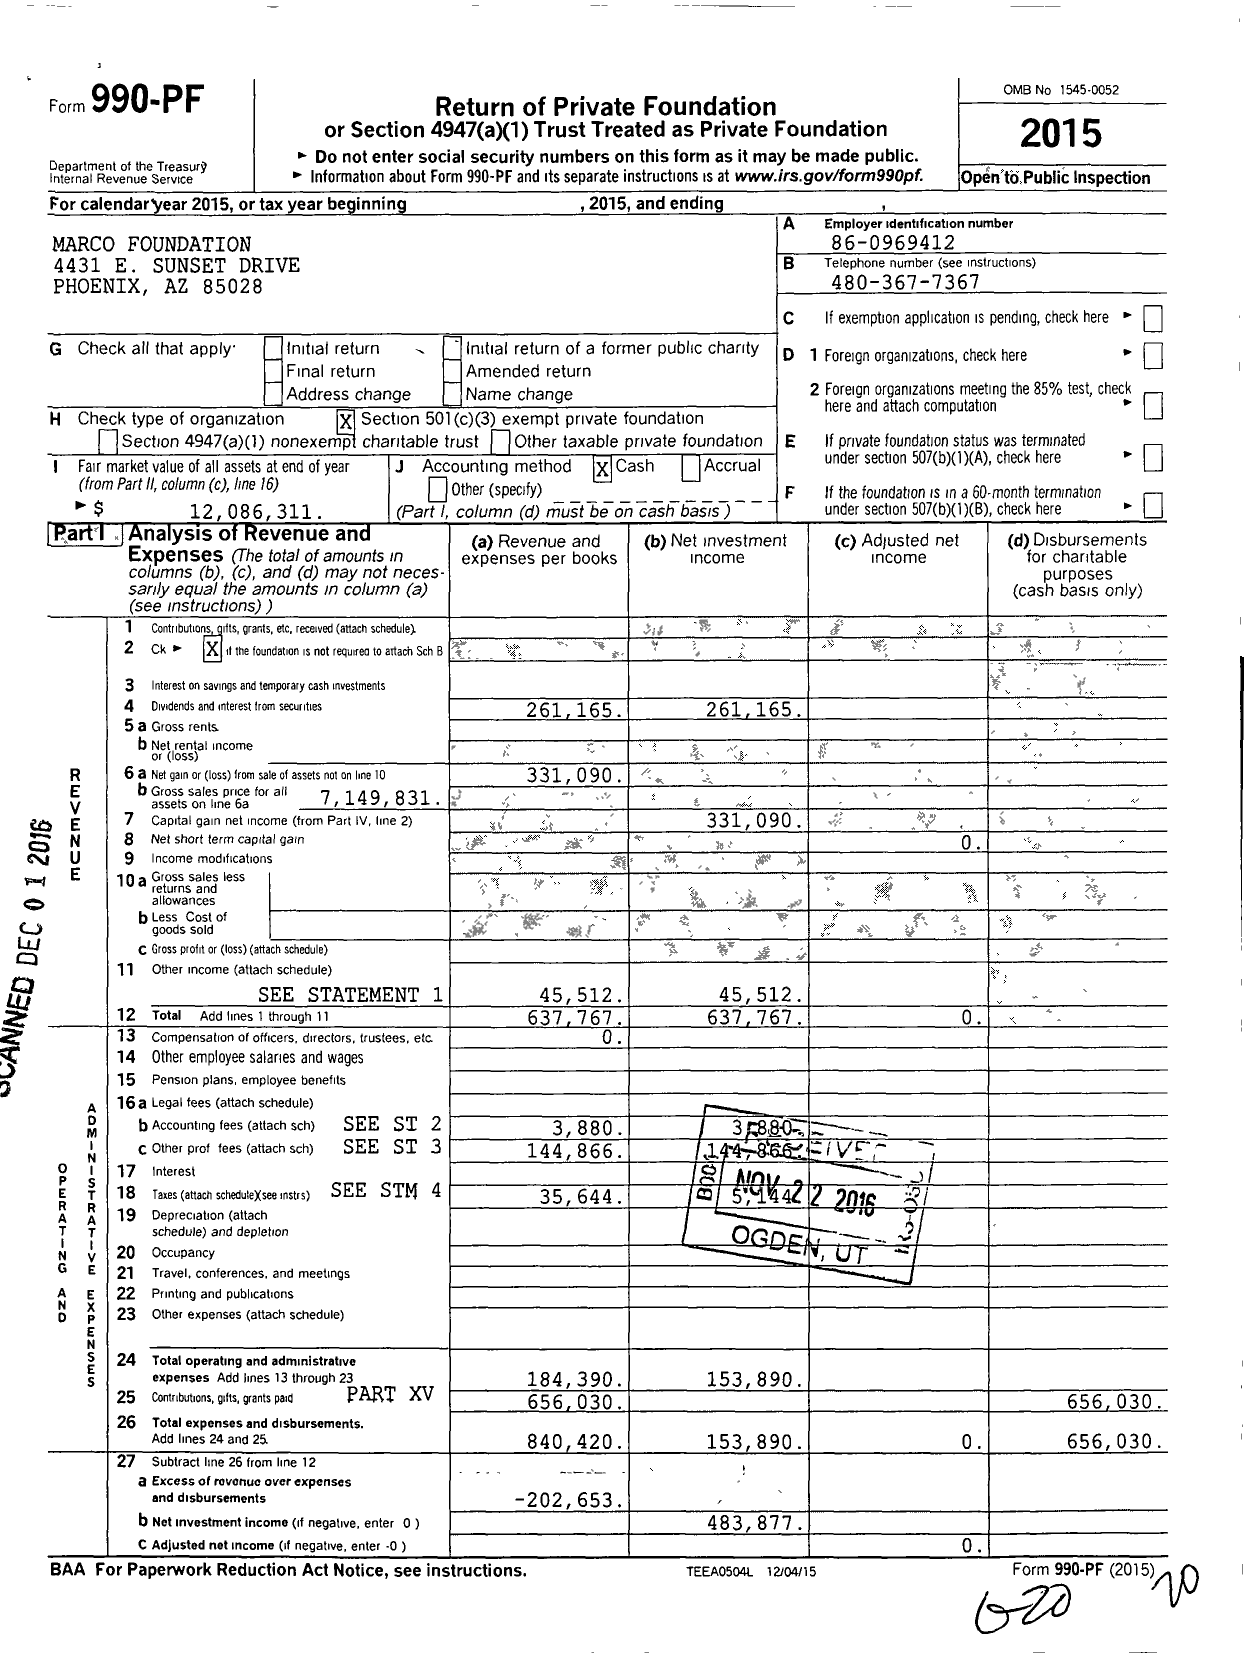 Image of first page of 2015 Form 990PF for Marco Foundation